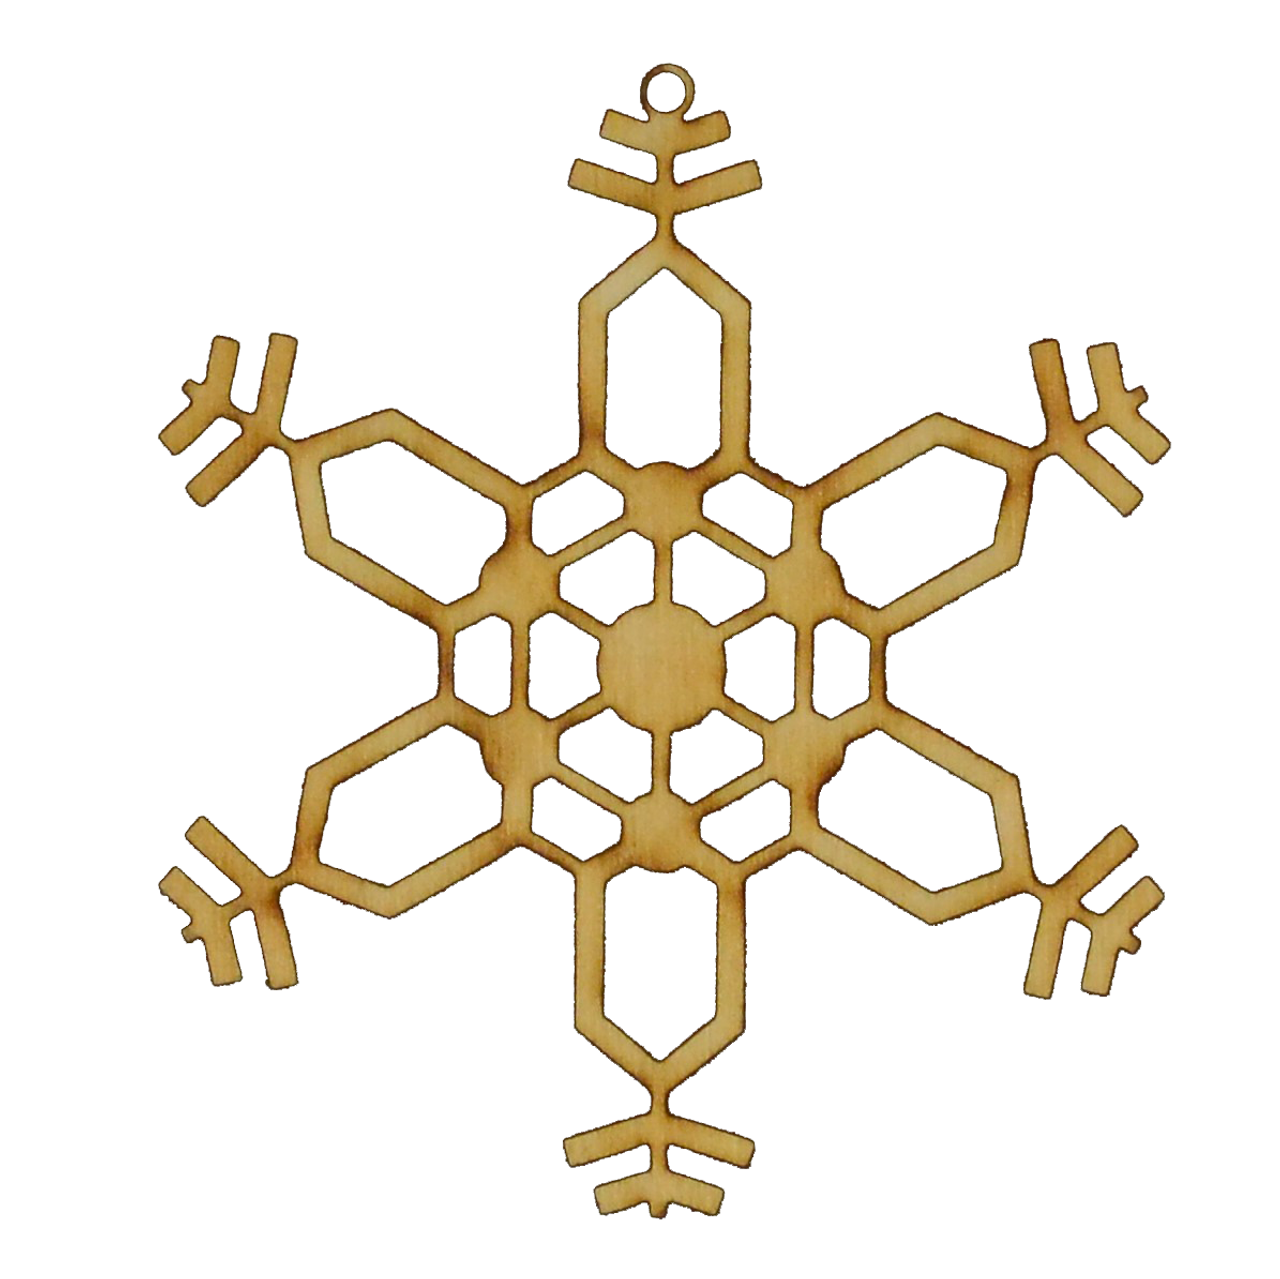 PEKMAR Snowflake Ornaments,Wooden Snowflakes,Snowflakes for  Crafts,Christmas Tree Ornaments,Winter Party Decorations,6pcs/Bag (6pcs  White Christmas